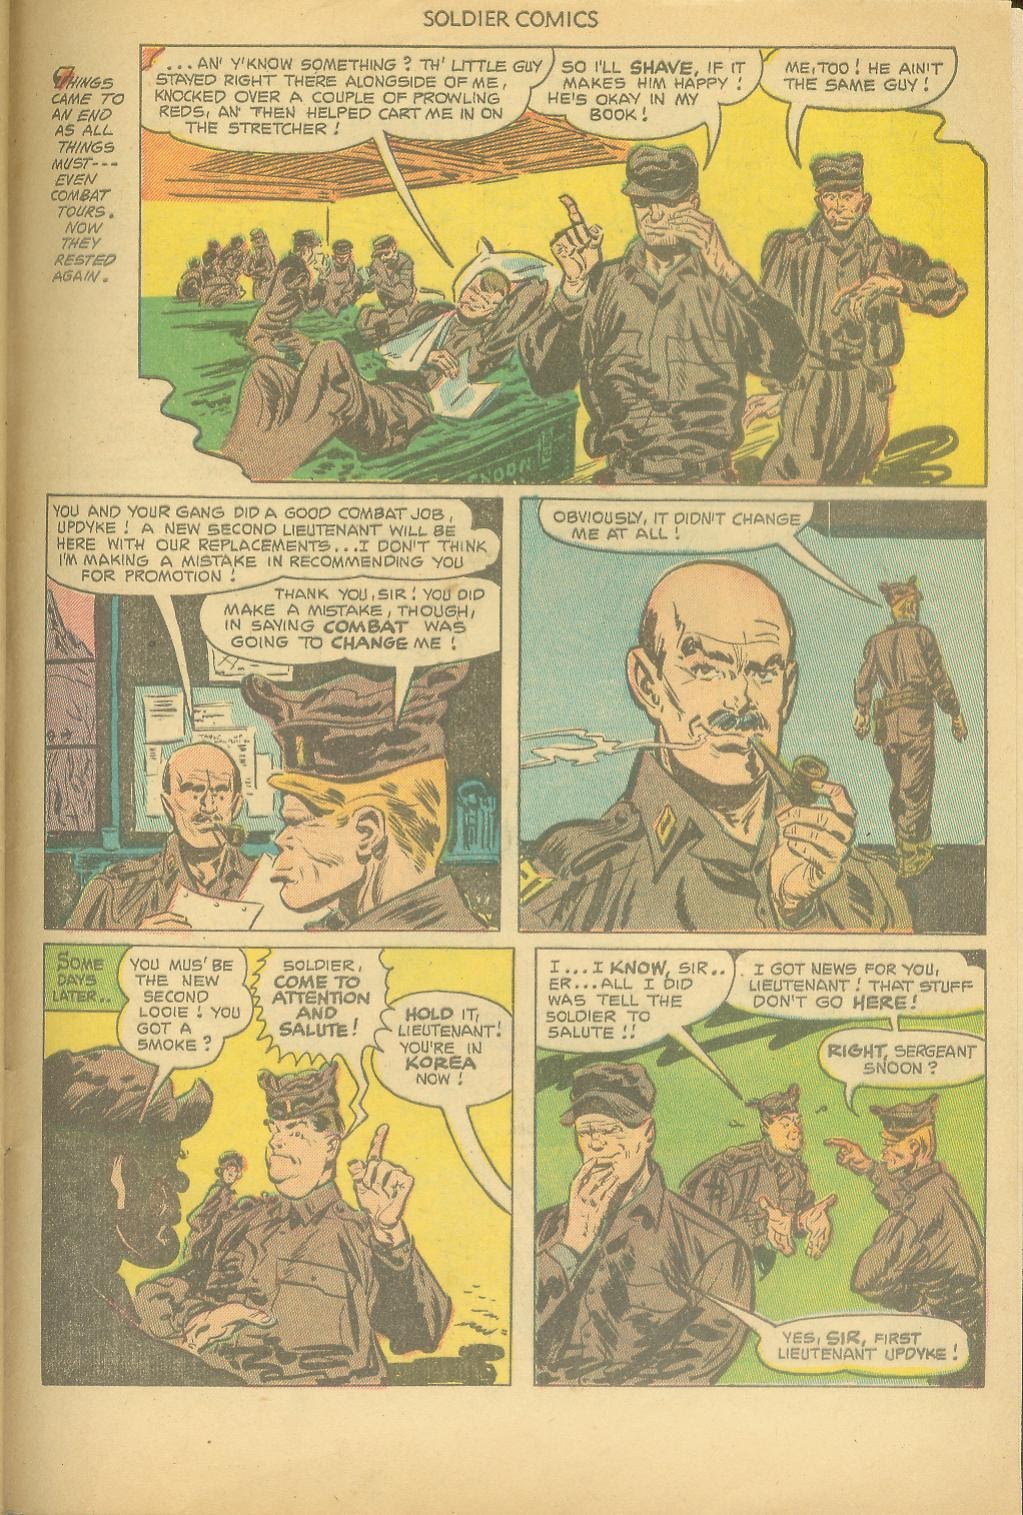 Read online Soldier Comics comic -  Issue #5 - 33